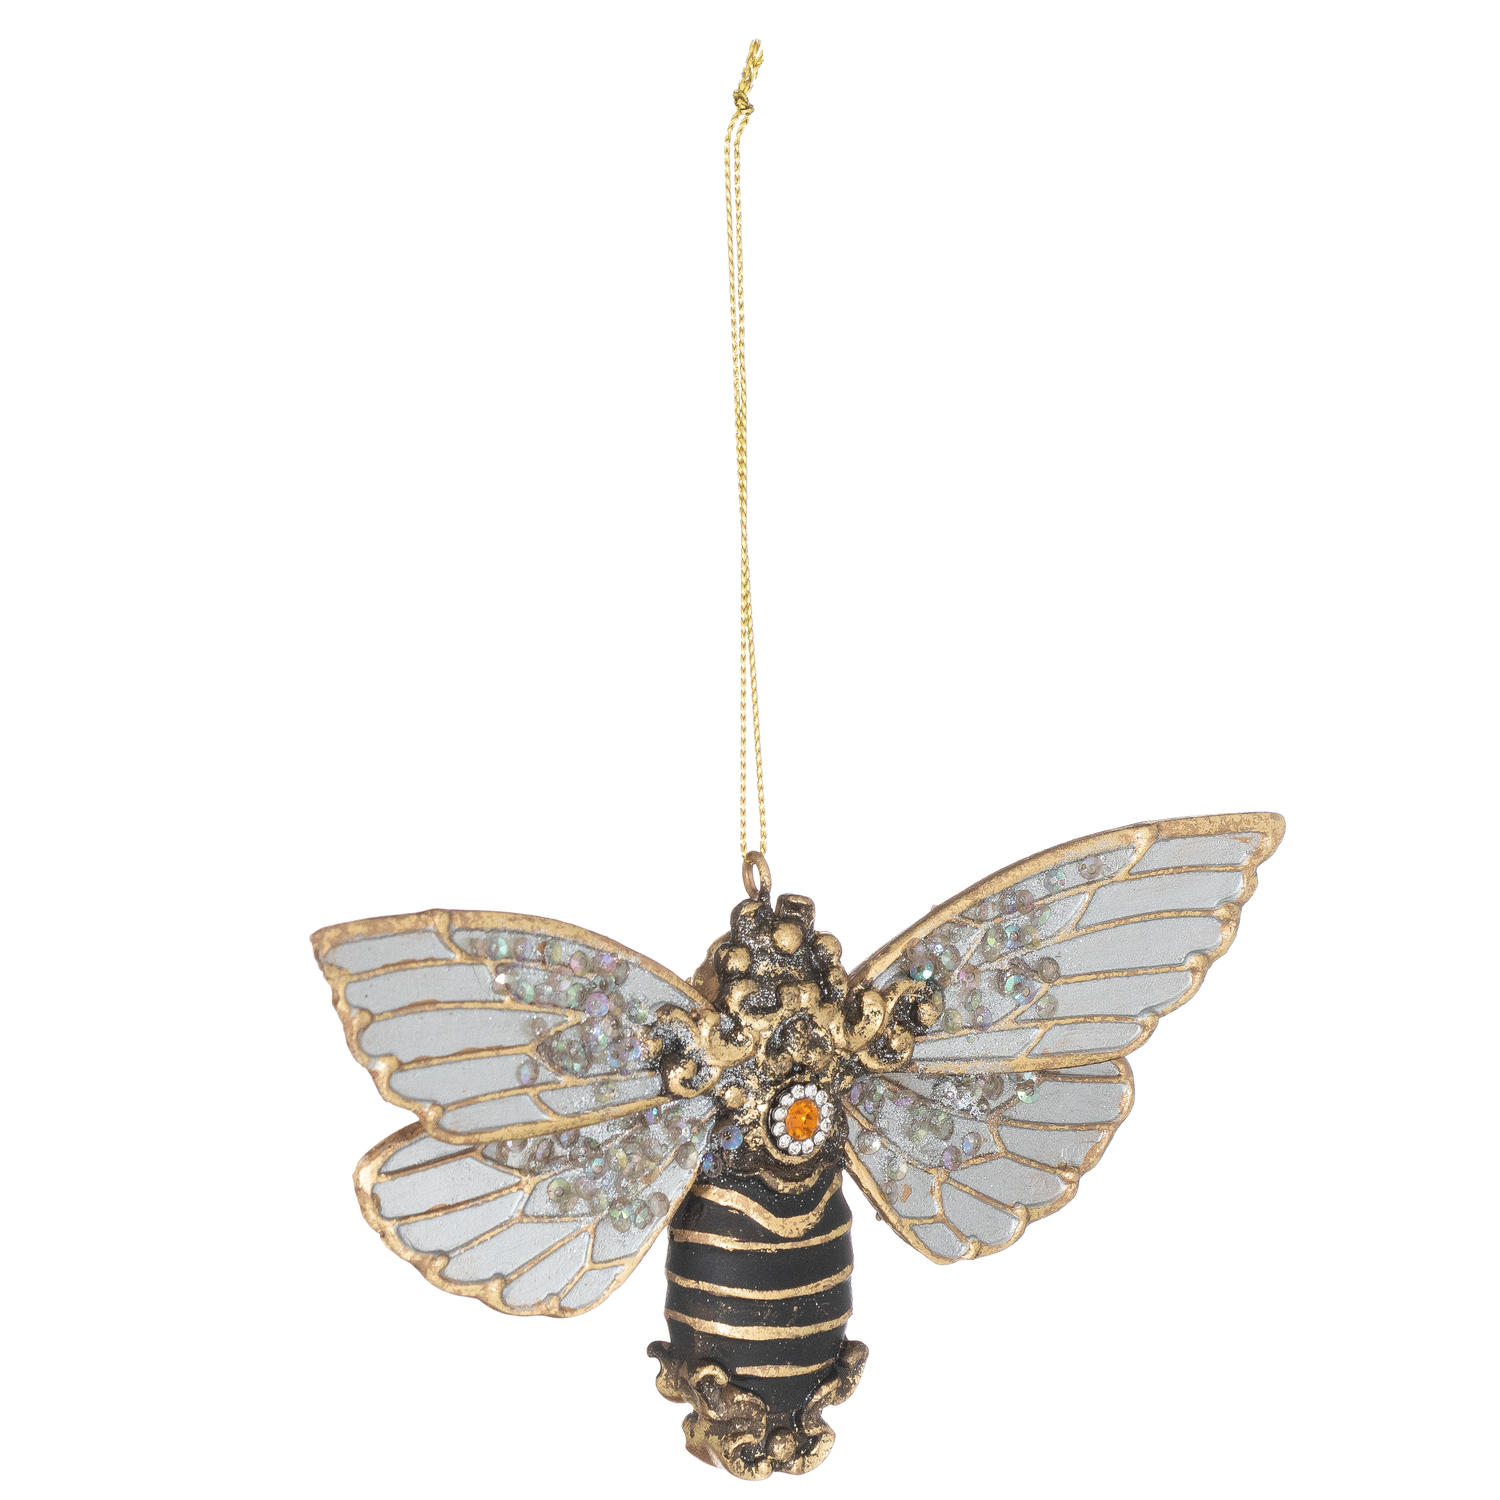 Hanging Bee Ornament - Image 1